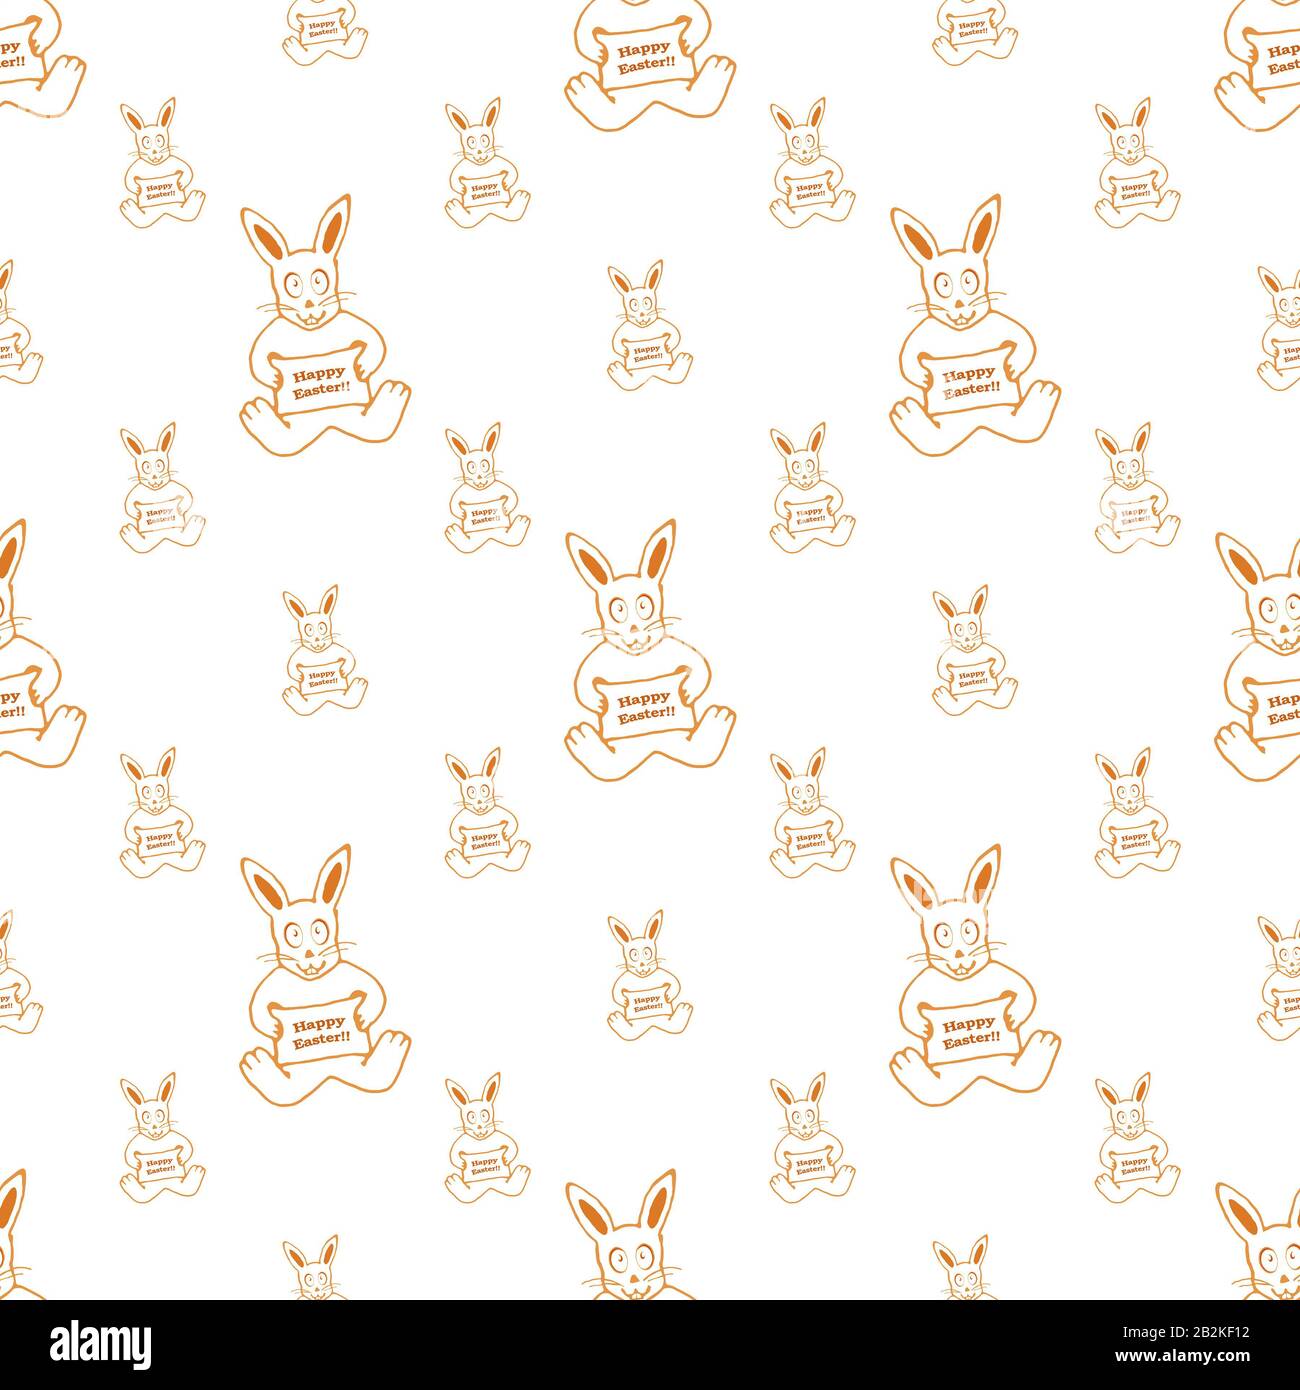 Happy easter rabbit motif seamless pattern design in light brown and white colors Stock Photo